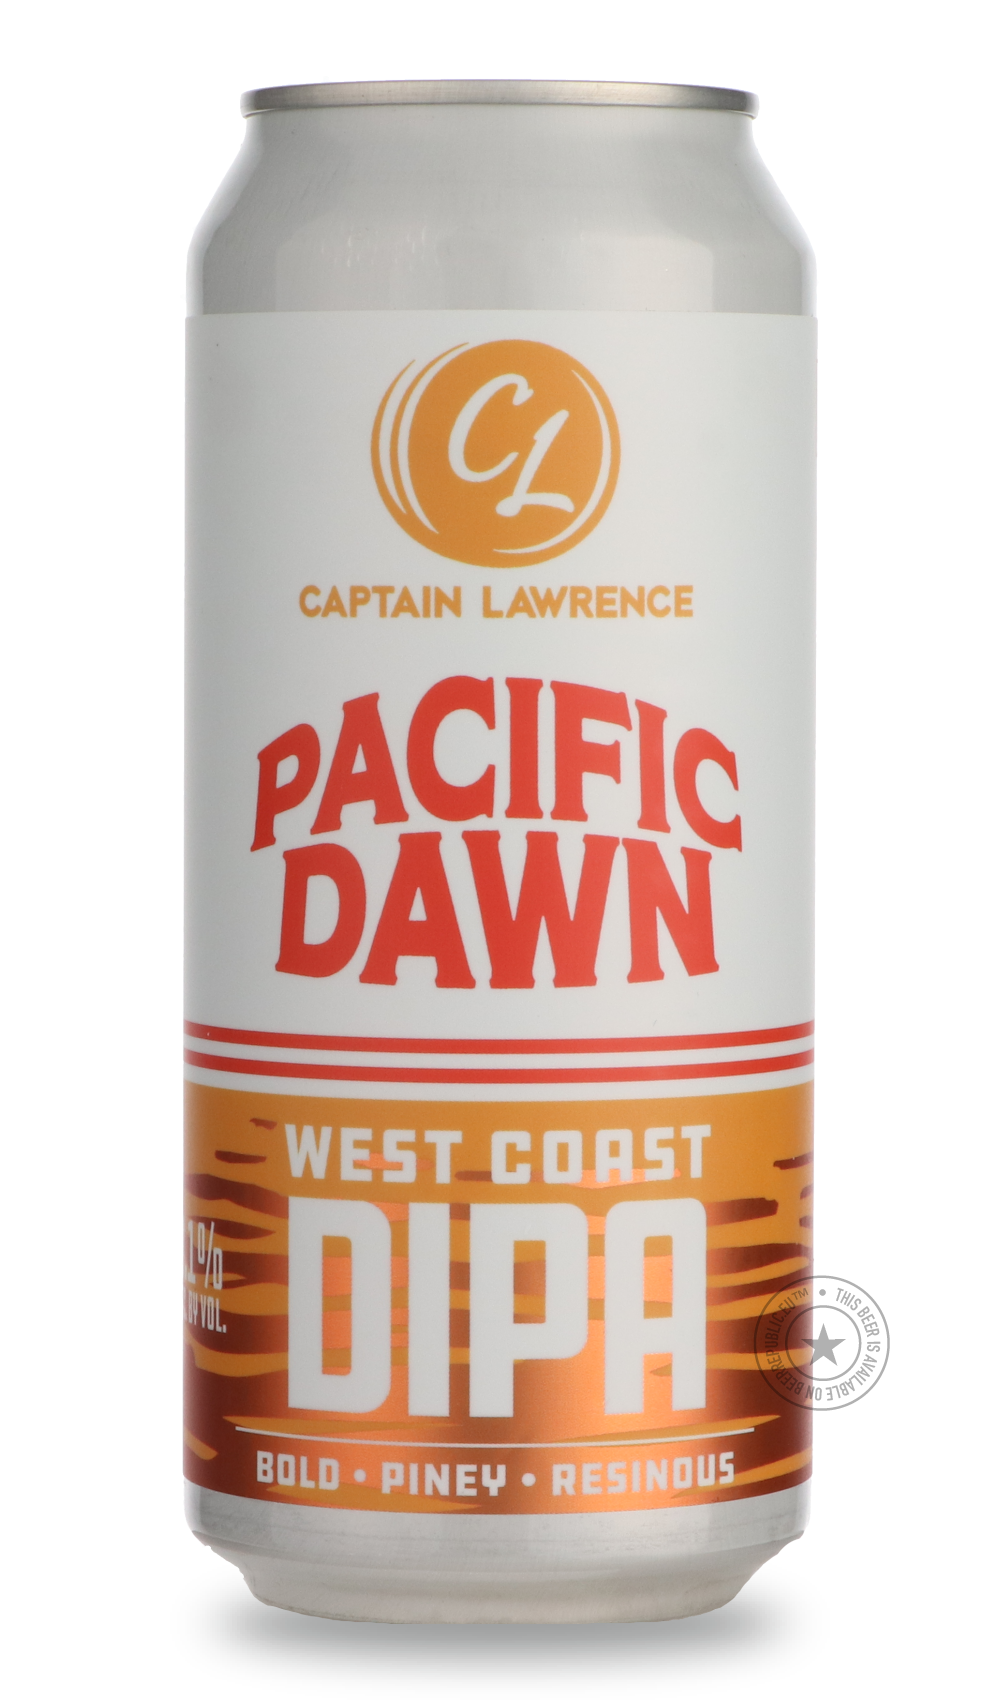 -Captain Lawrence- Pacific Dawn-IPA- Only @ Beer Republic - The best online beer store for American & Canadian craft beer - Buy beer online from the USA and Canada - Bier online kopen - Amerikaans bier kopen - Craft beer store - Craft beer kopen - Amerikanisch bier kaufen - Bier online kaufen - Acheter biere online - IPA - Stout - Porter - New England IPA - Hazy IPA - Imperial Stout - Barrel Aged - Barrel Aged Imperial Stout - Brown - Dark beer - Blond - Blonde - Pilsner - Lager - Wheat - Weizen - Amber - B